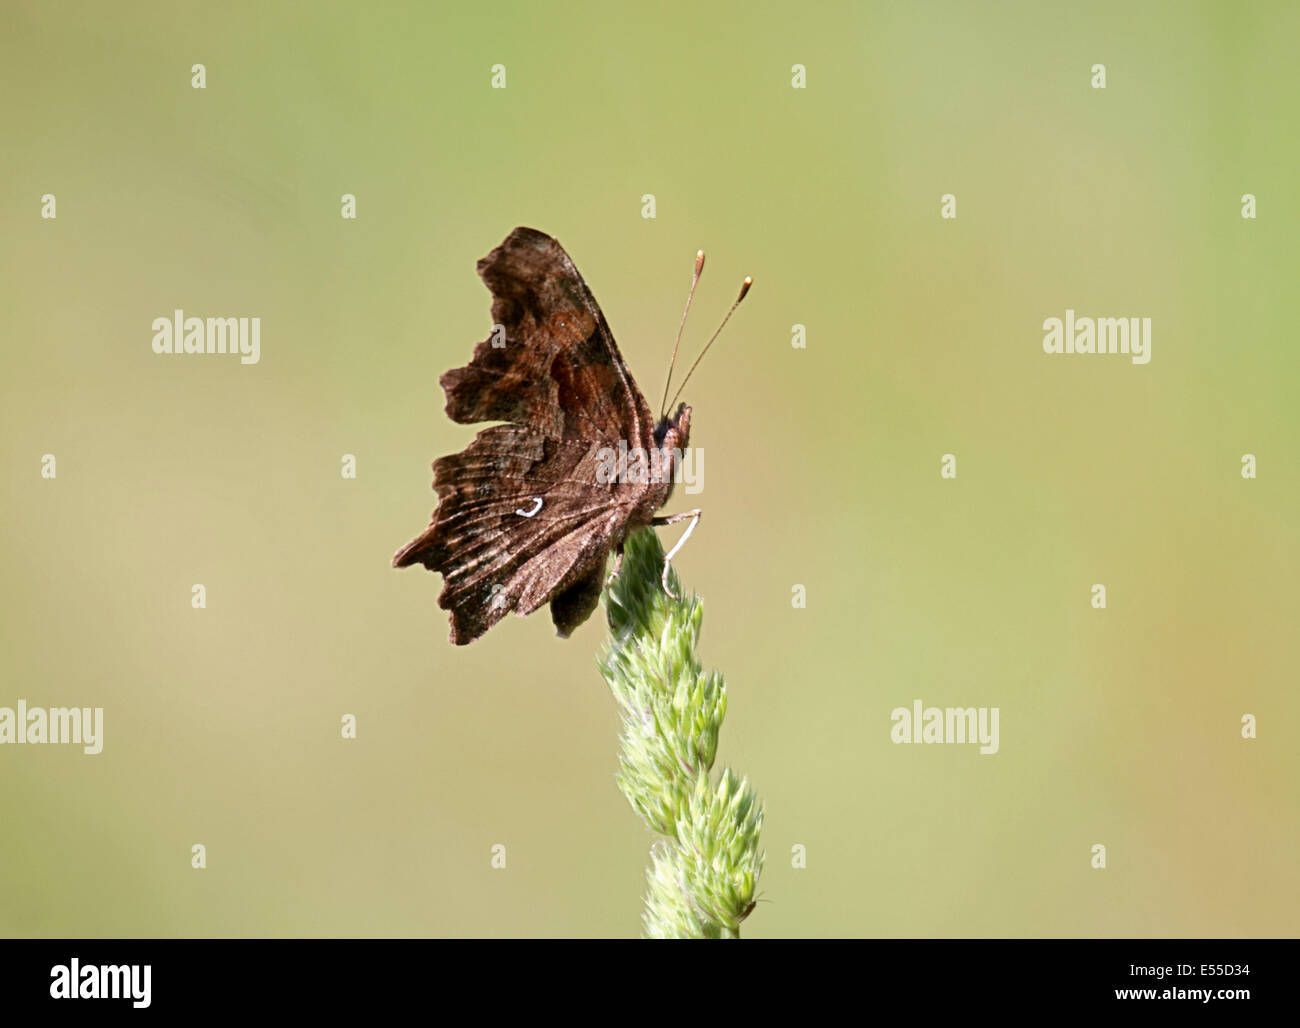 Comma butterfly perched on Cocksfoot grass in Poland Stock Photo